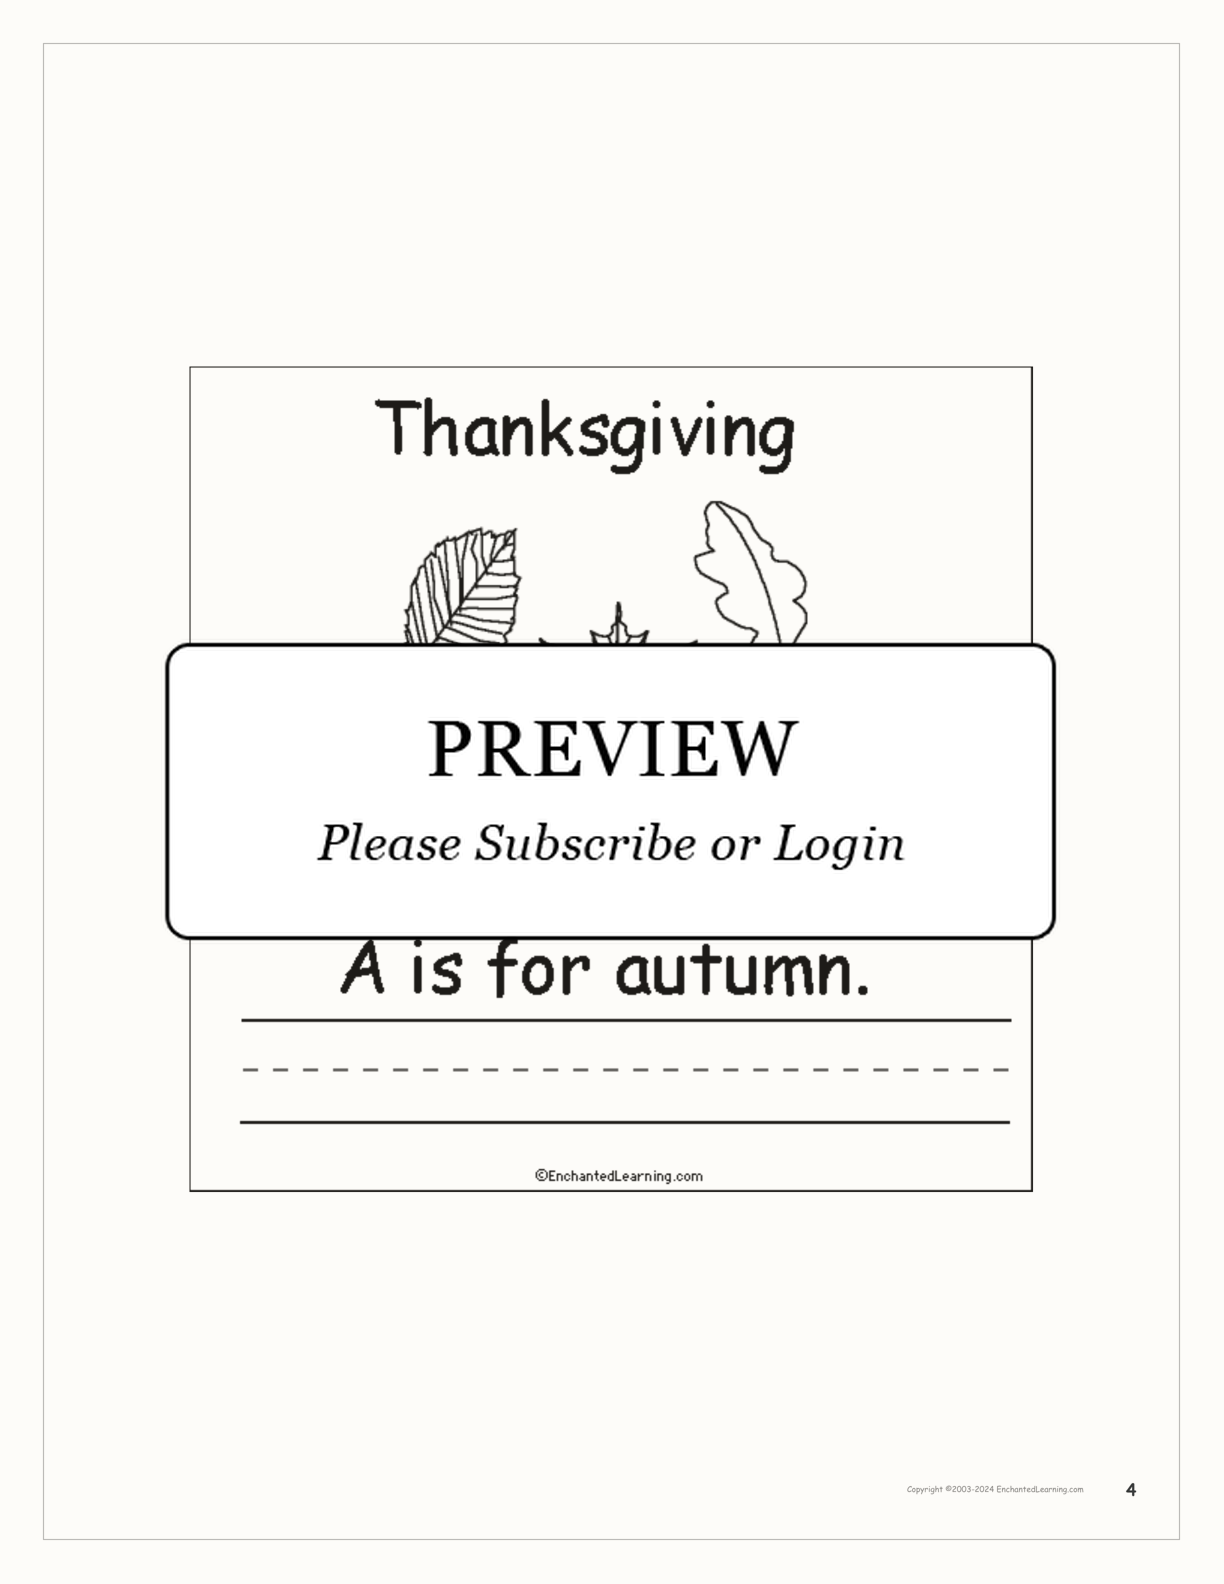 'Thanksgiving is for...' Book for Early Readers interactive printout page 4